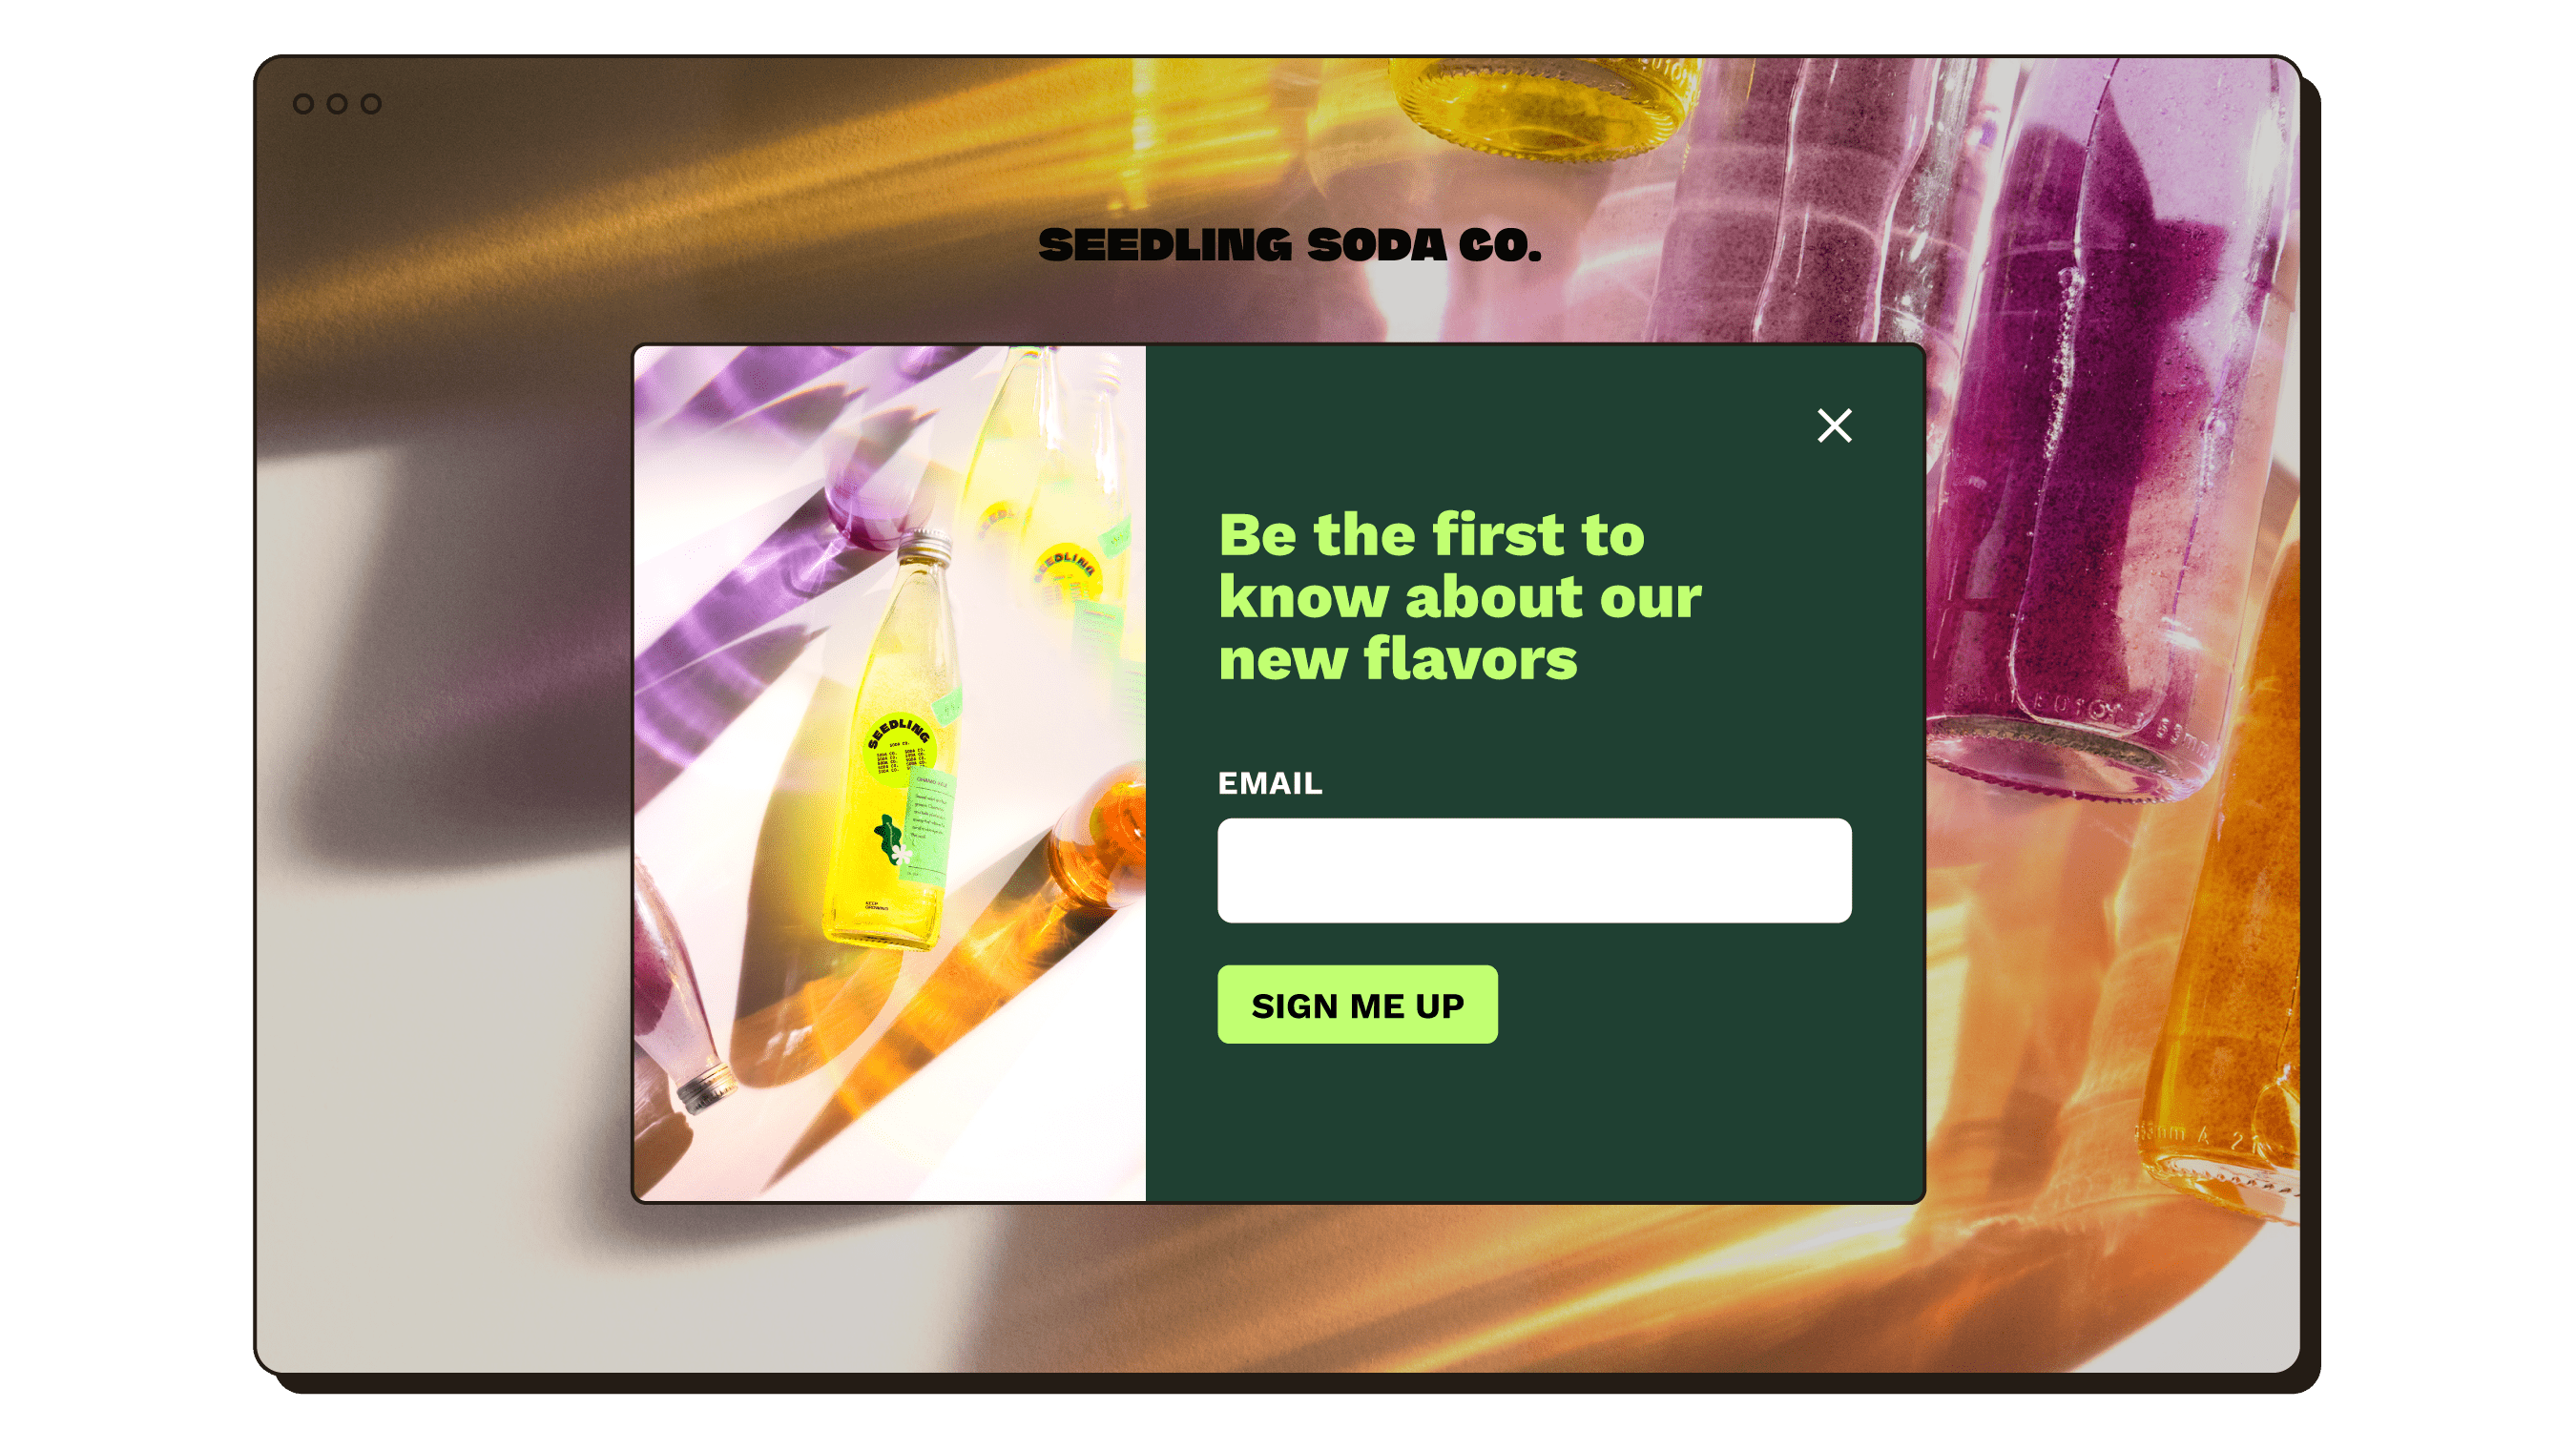 Website with signup form. Sign up to be the first to know about new flavors.